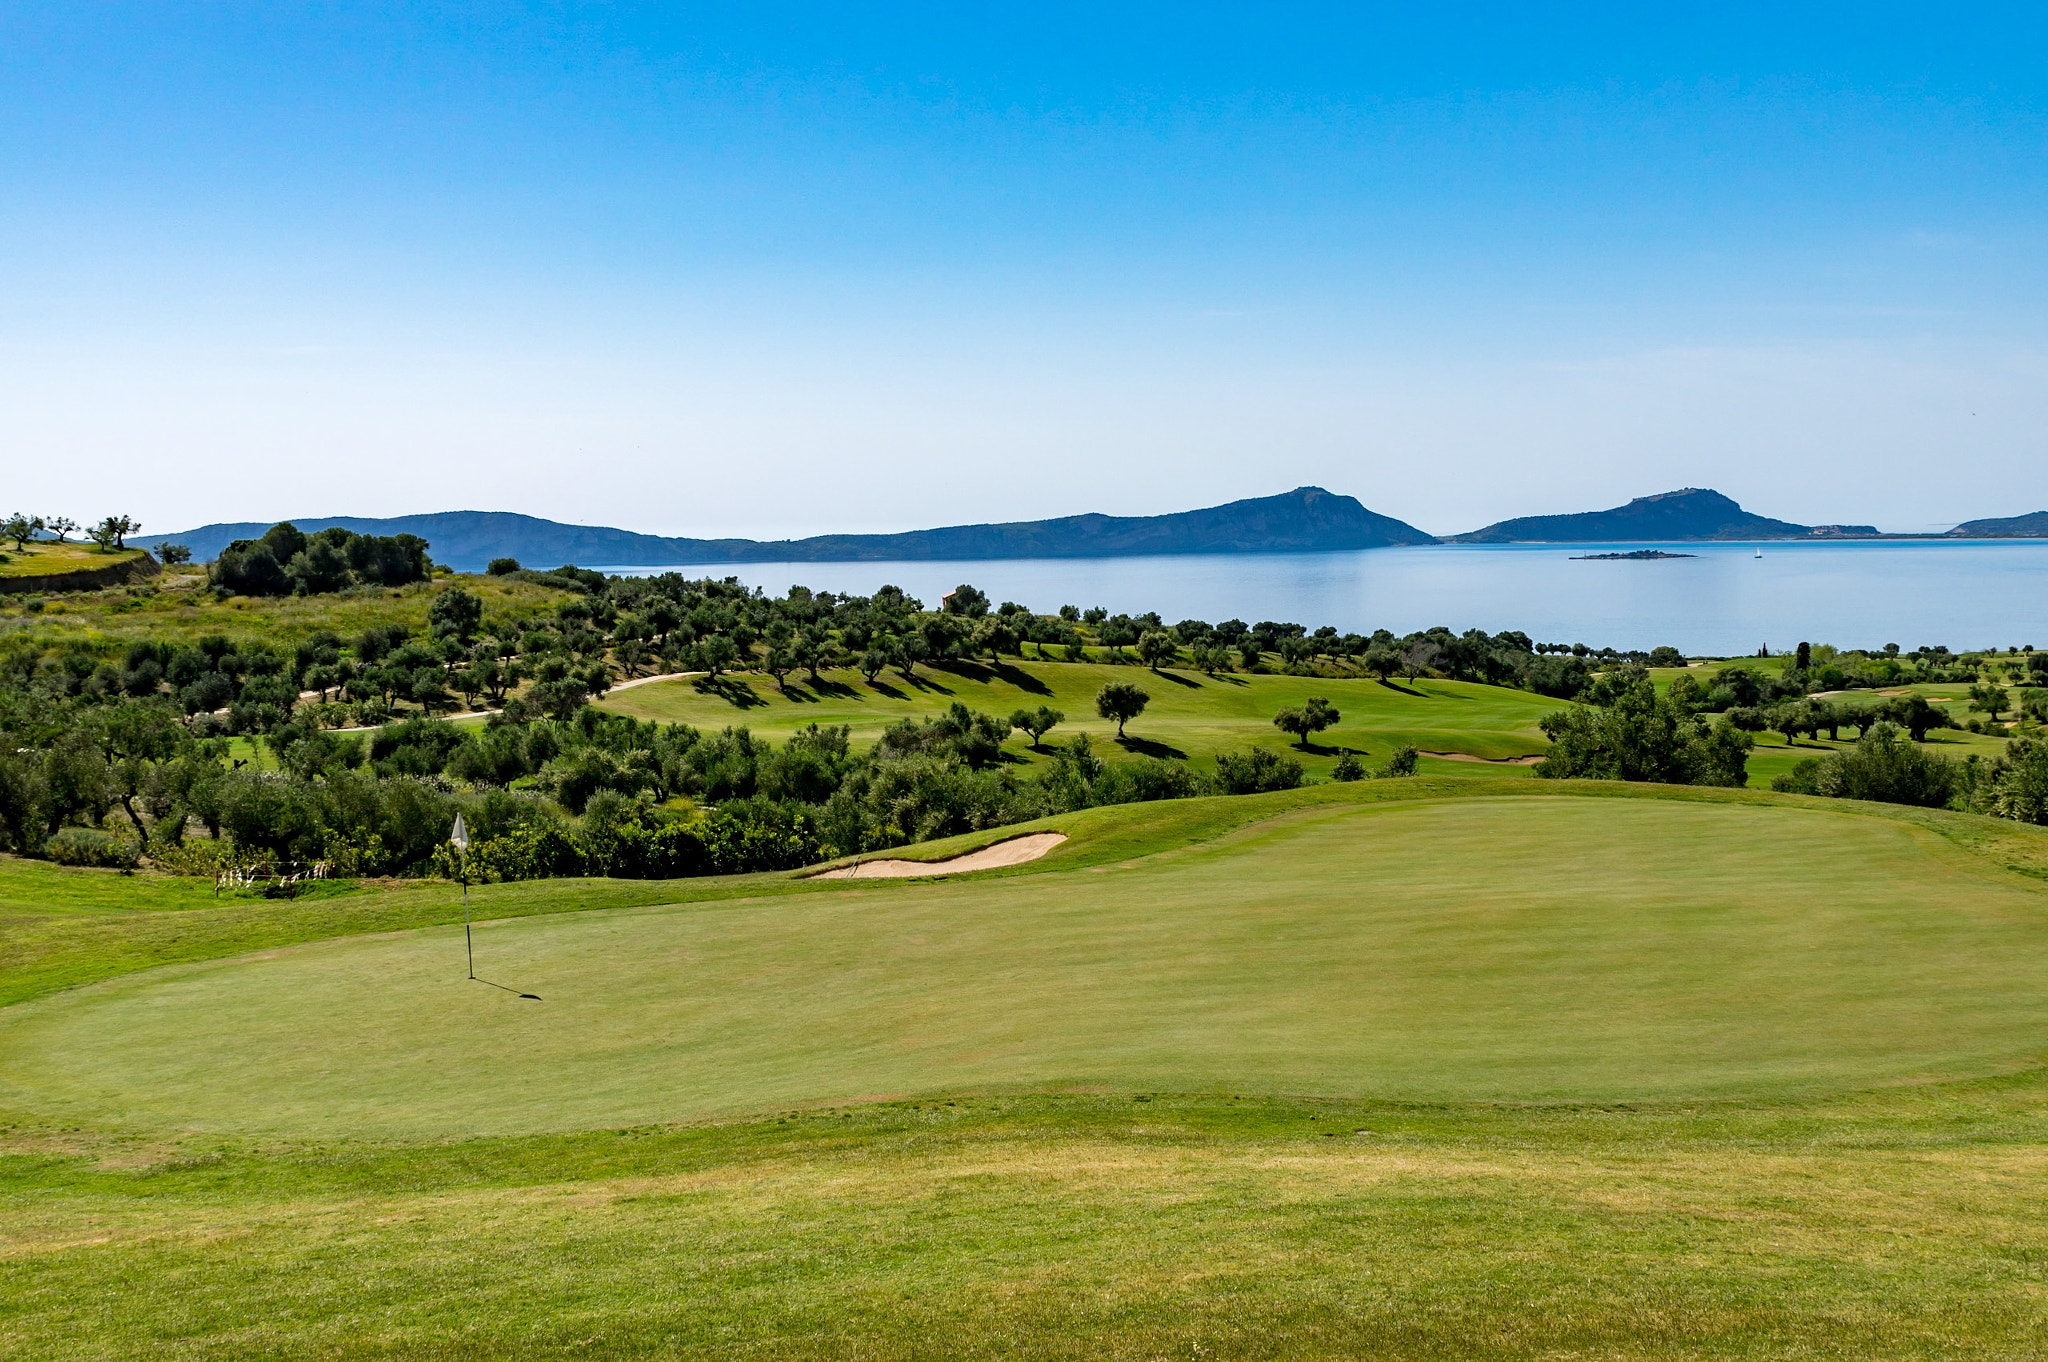 Pentax K-3 sample photo. One of the great views from the bay course at costa navarino in greece. photography